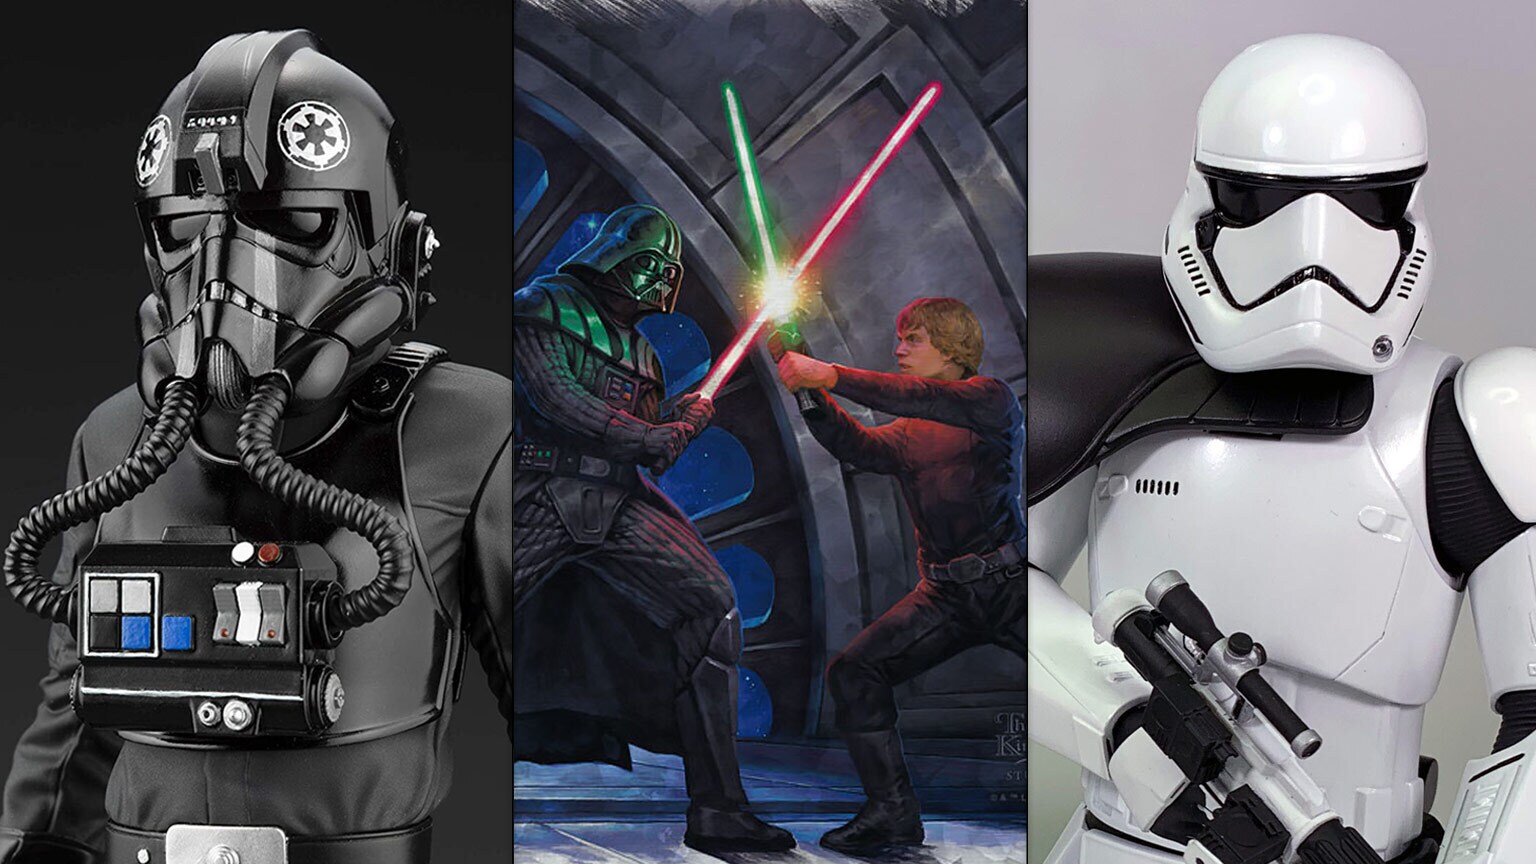 Updated: Star Wars Celebration 2020 Licensee Exclusives Revealed